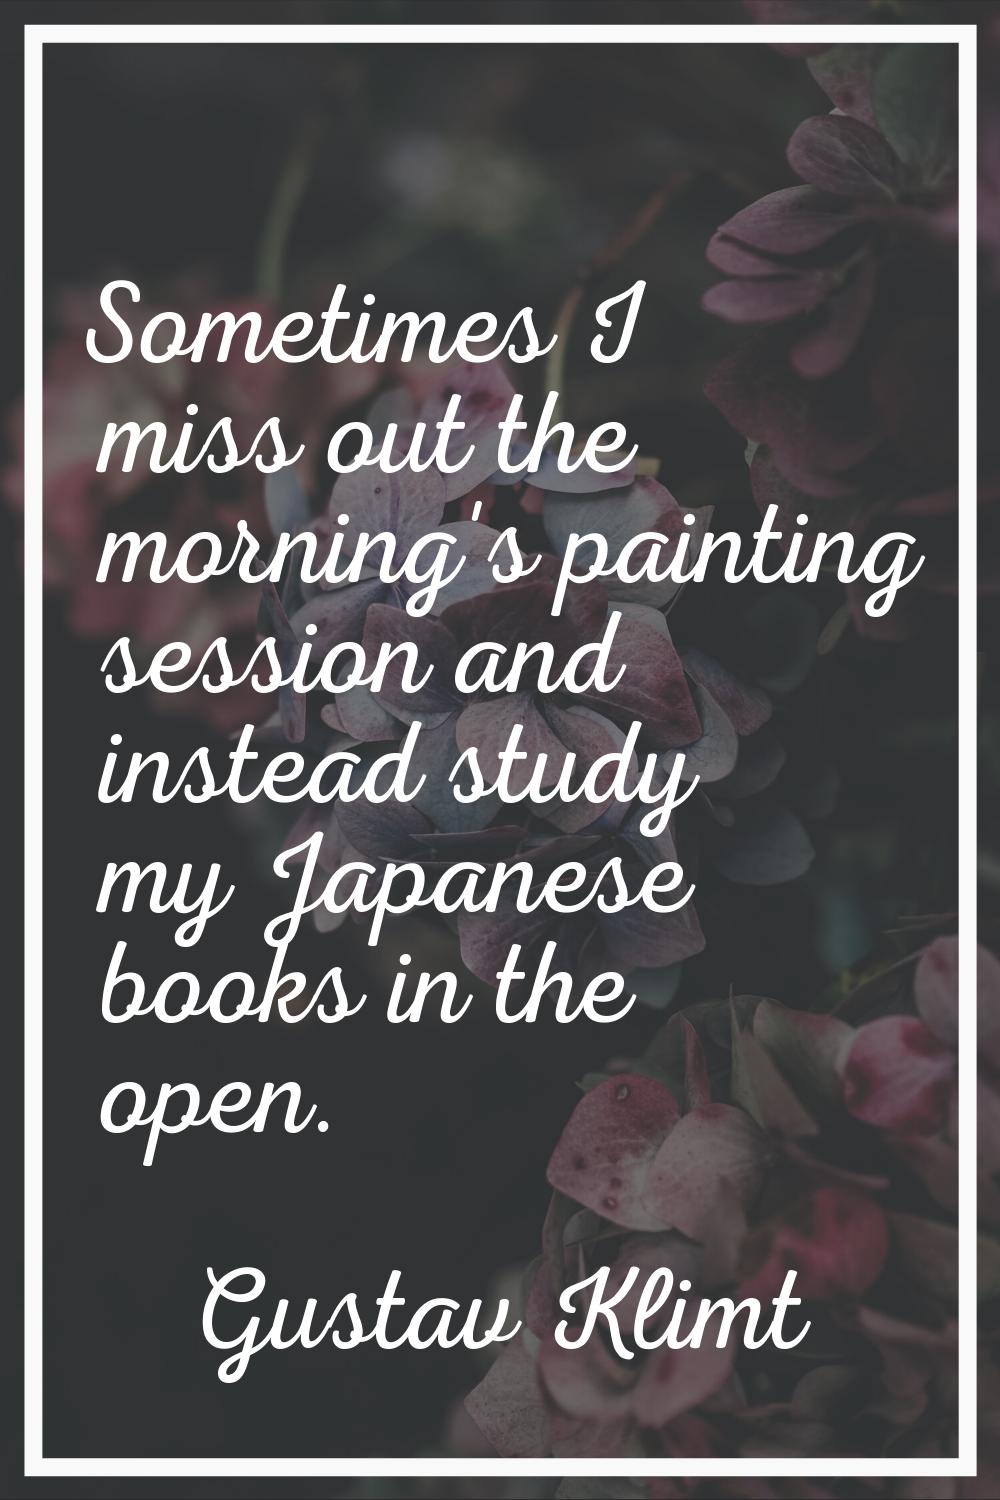 Sometimes I miss out the morning's painting session and instead study my Japanese books in the open